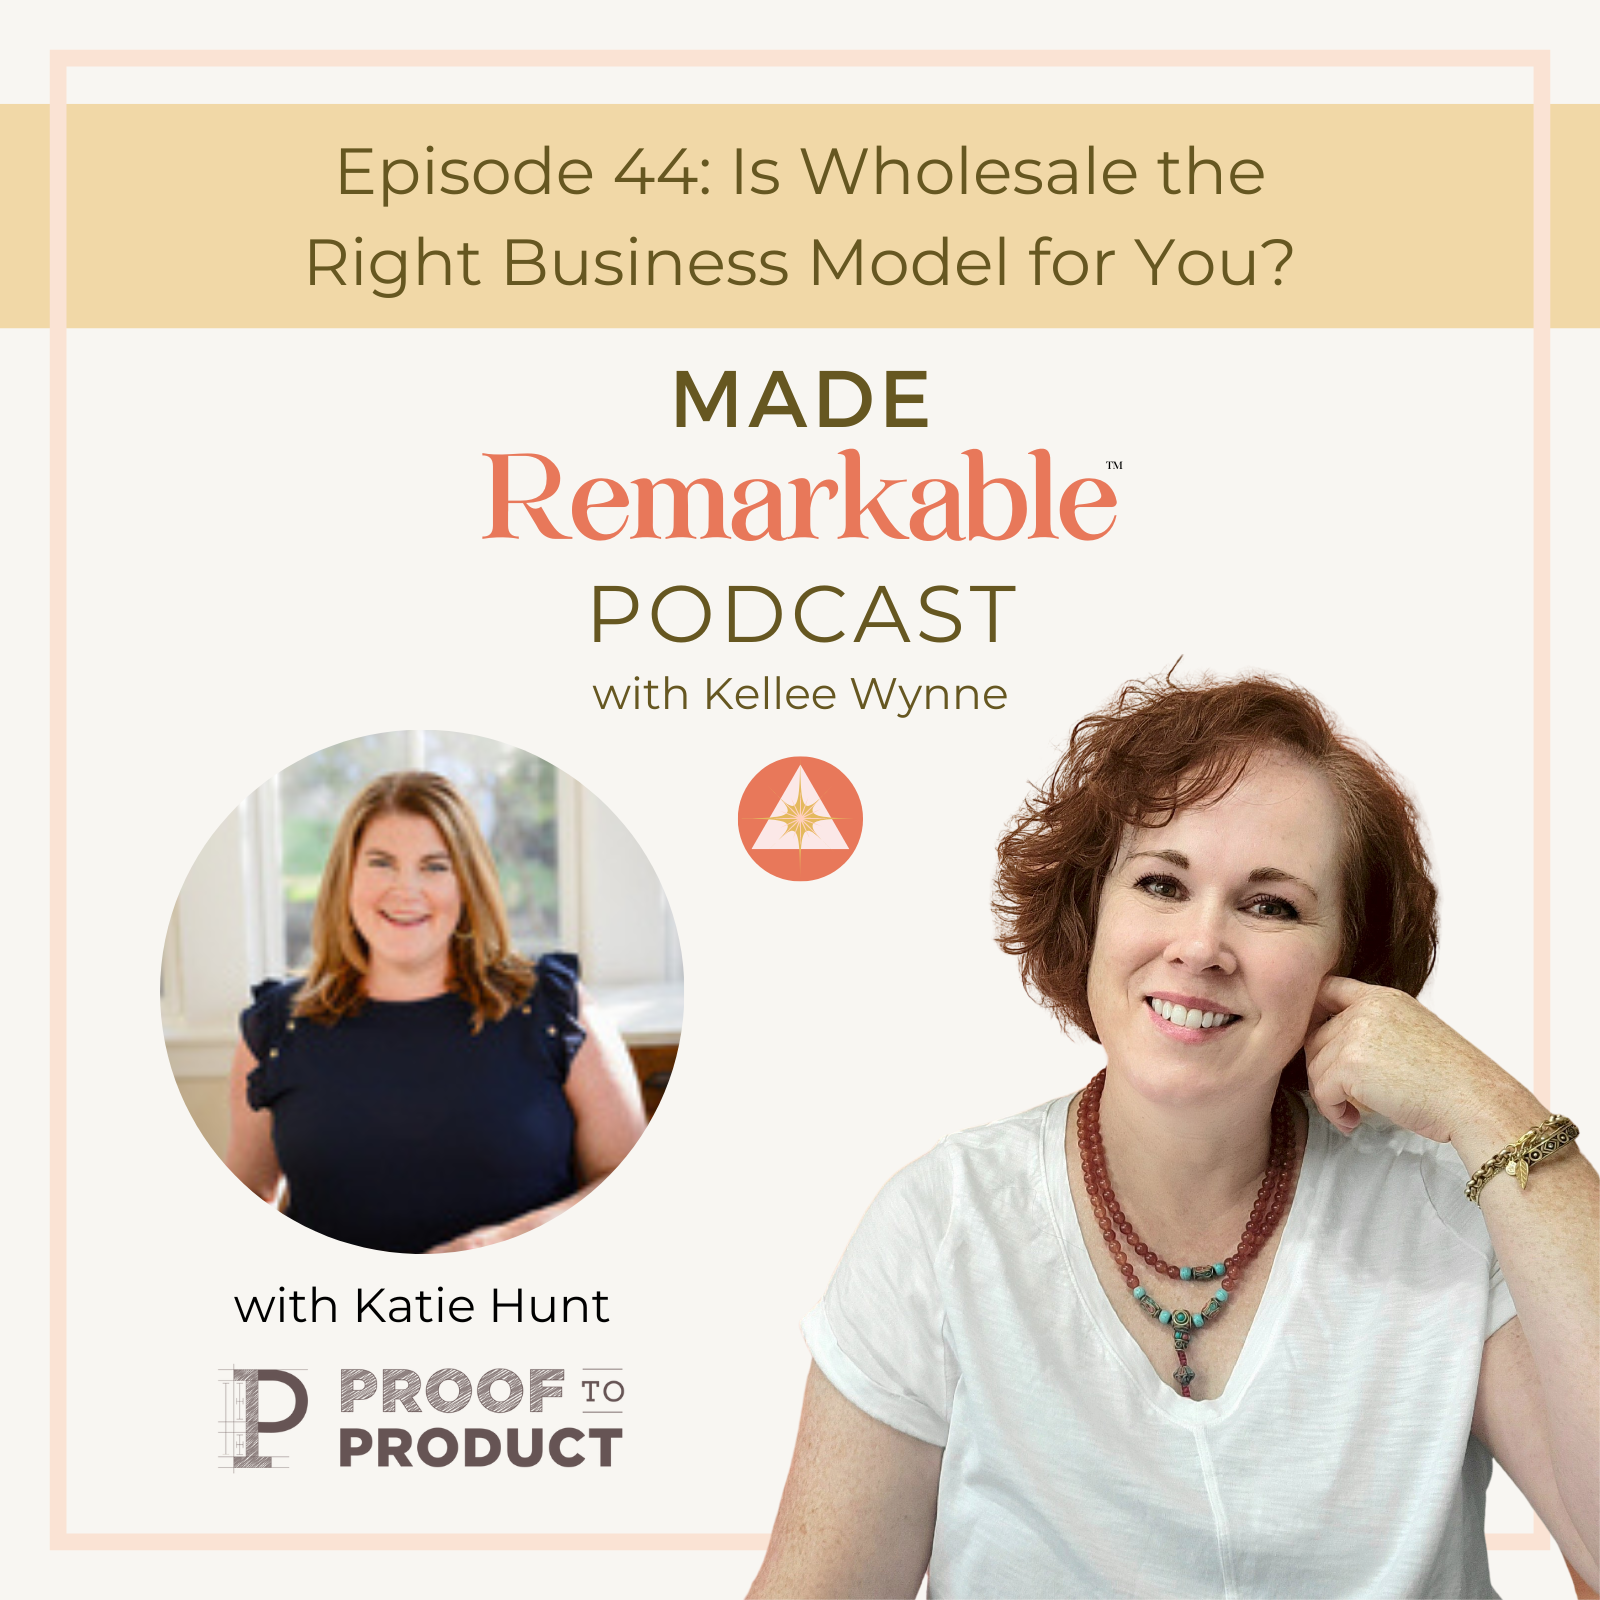 PODCAST Made Remarkable with Kellee Wynne Studios episode 44